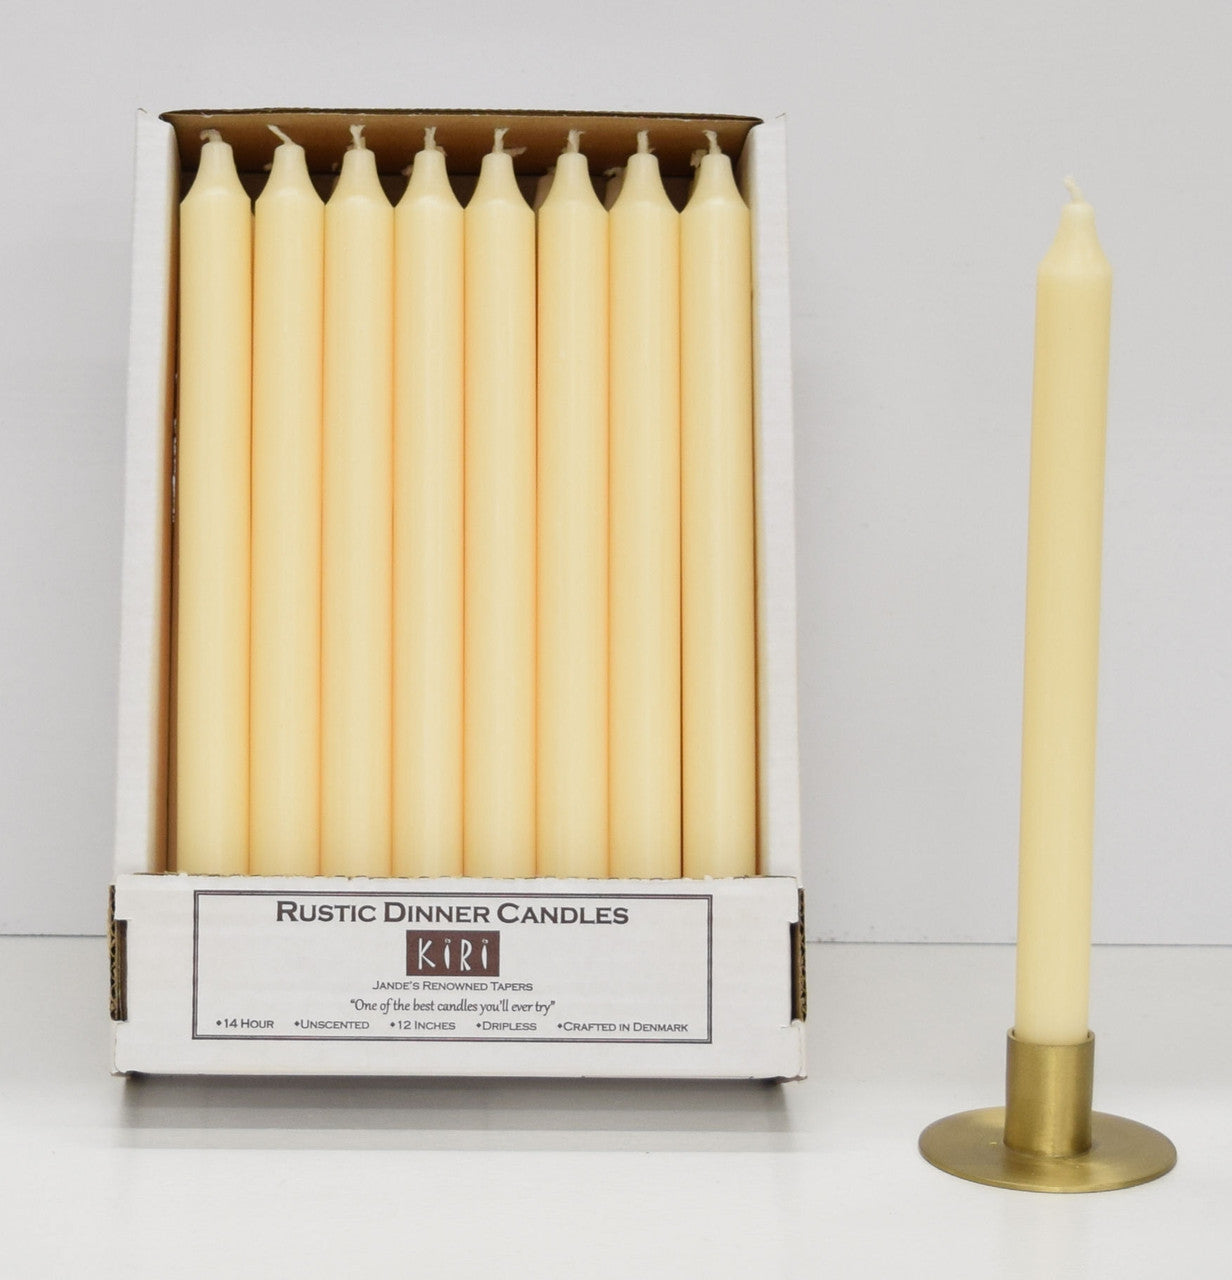 12 " Dripless Taper Candles